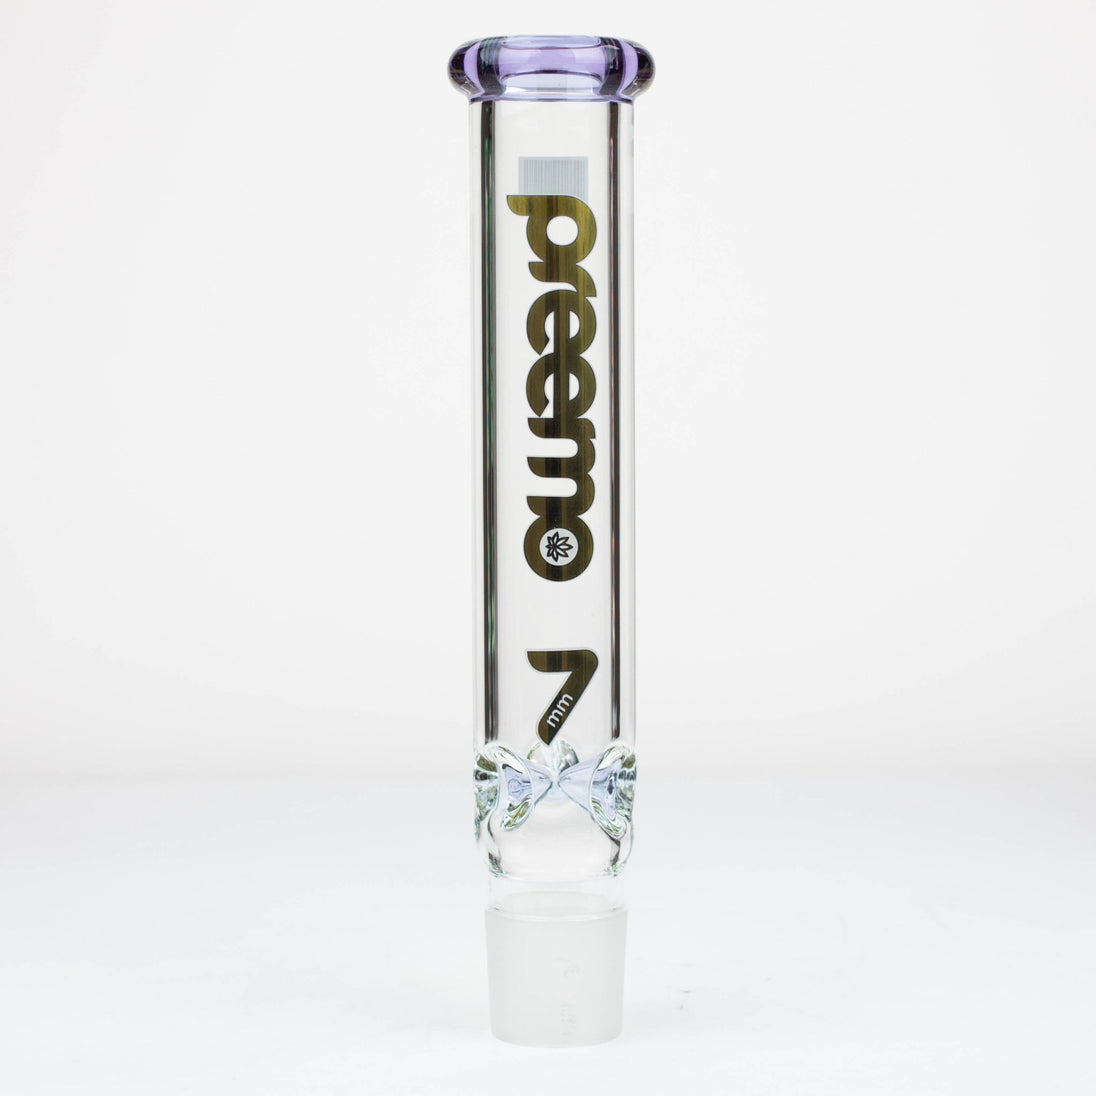 Preemo - 9" Tube Top Section - Glasss Station